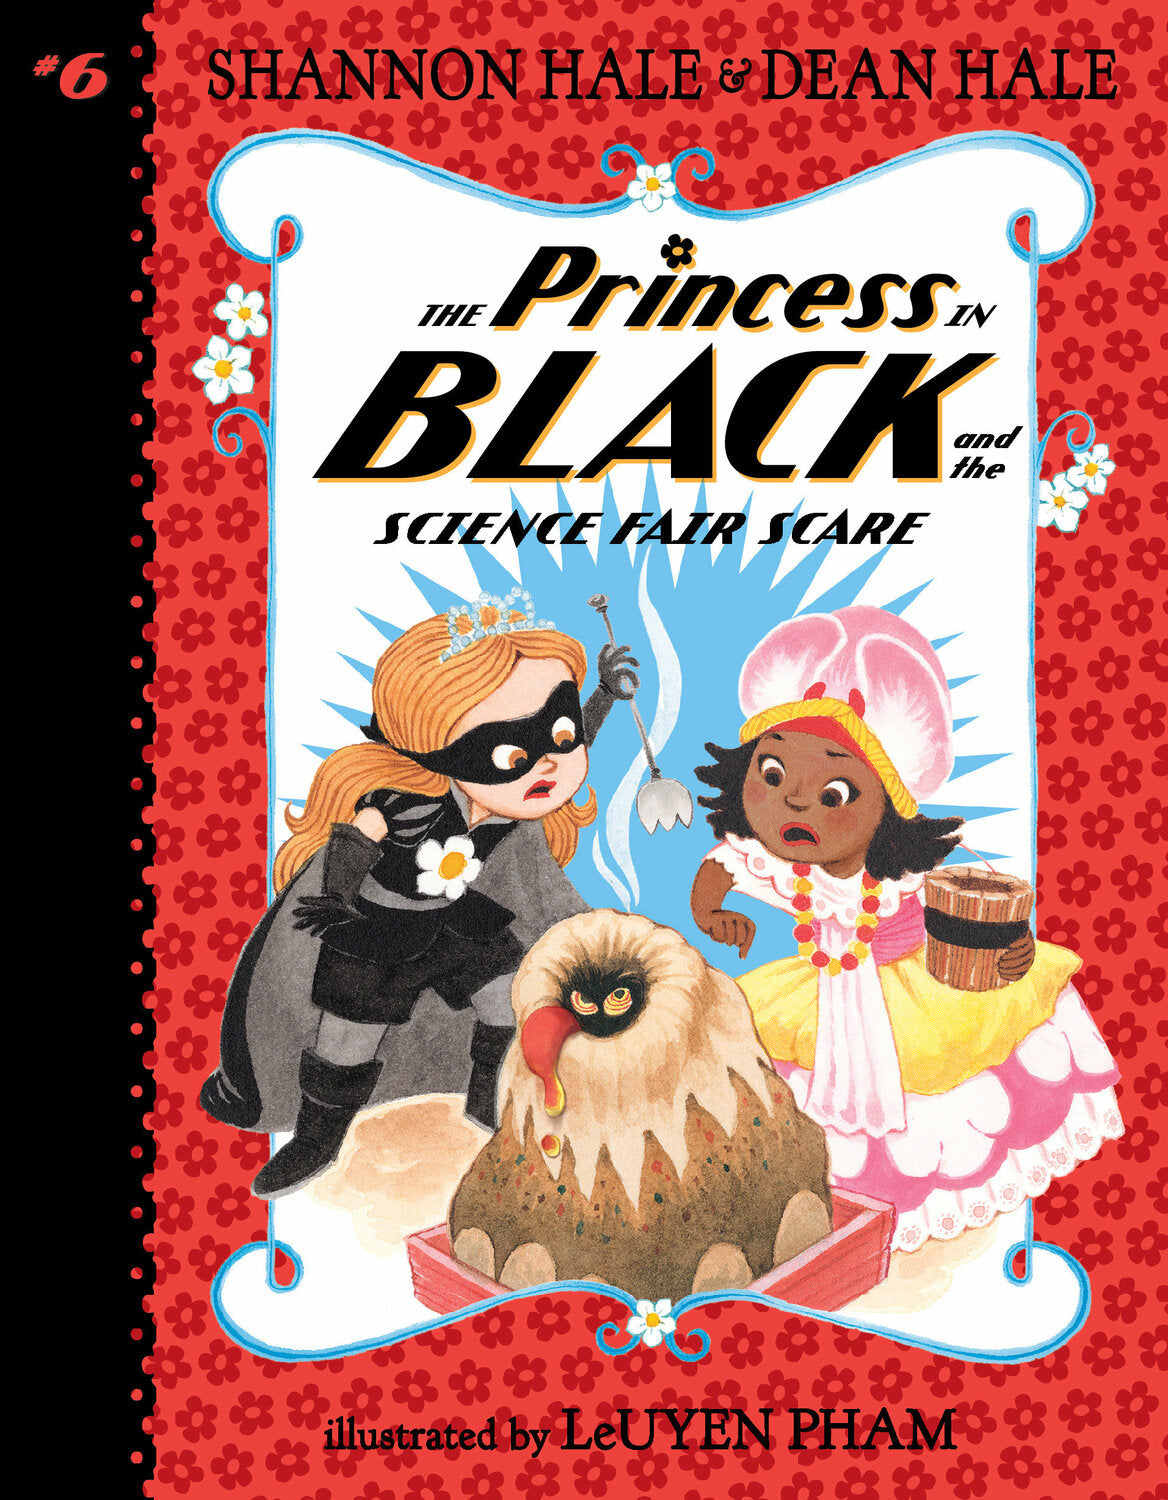 Princess in Black and the Science Fair Scare — Boing! Toy Shop